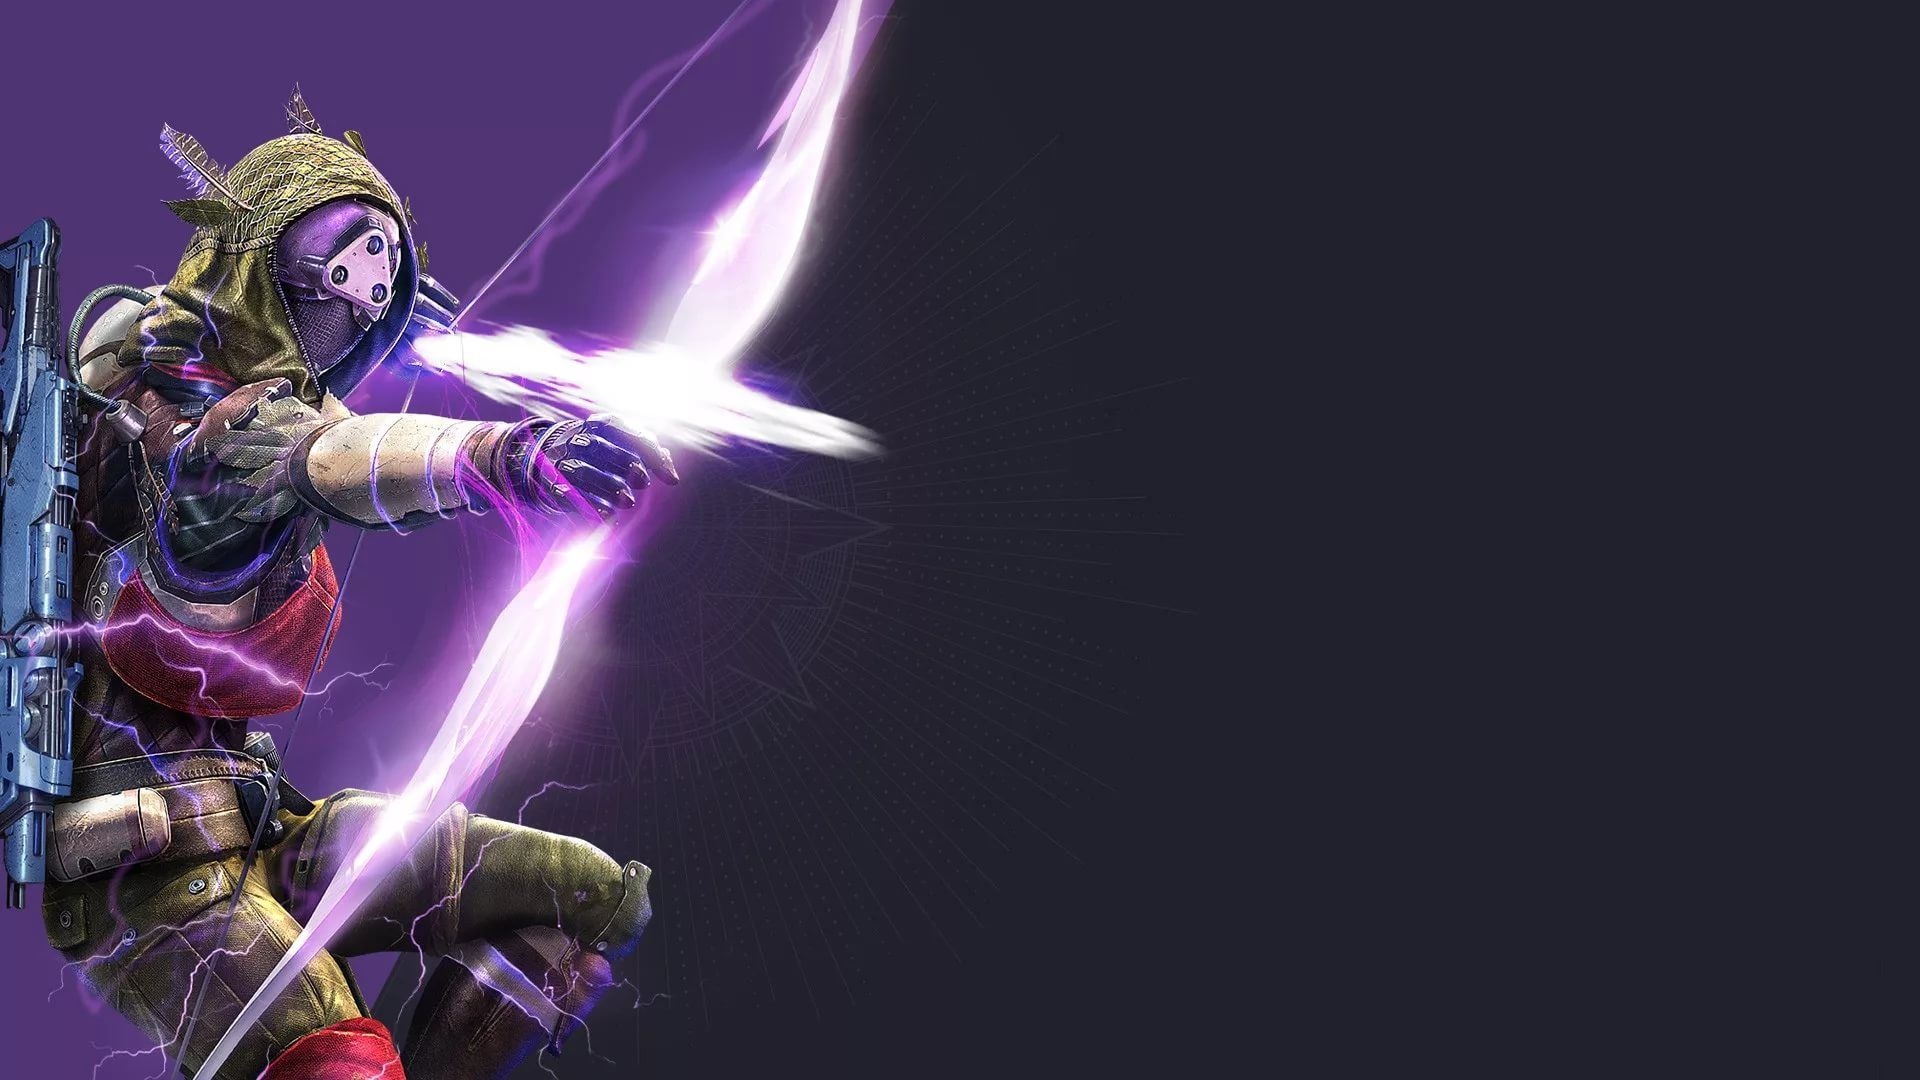 Destiny 2: The Witch Queen: Nightstalker, A Hunter subclass, The quest The Nightstalker's Trail. 1920x1080 Full HD Background.